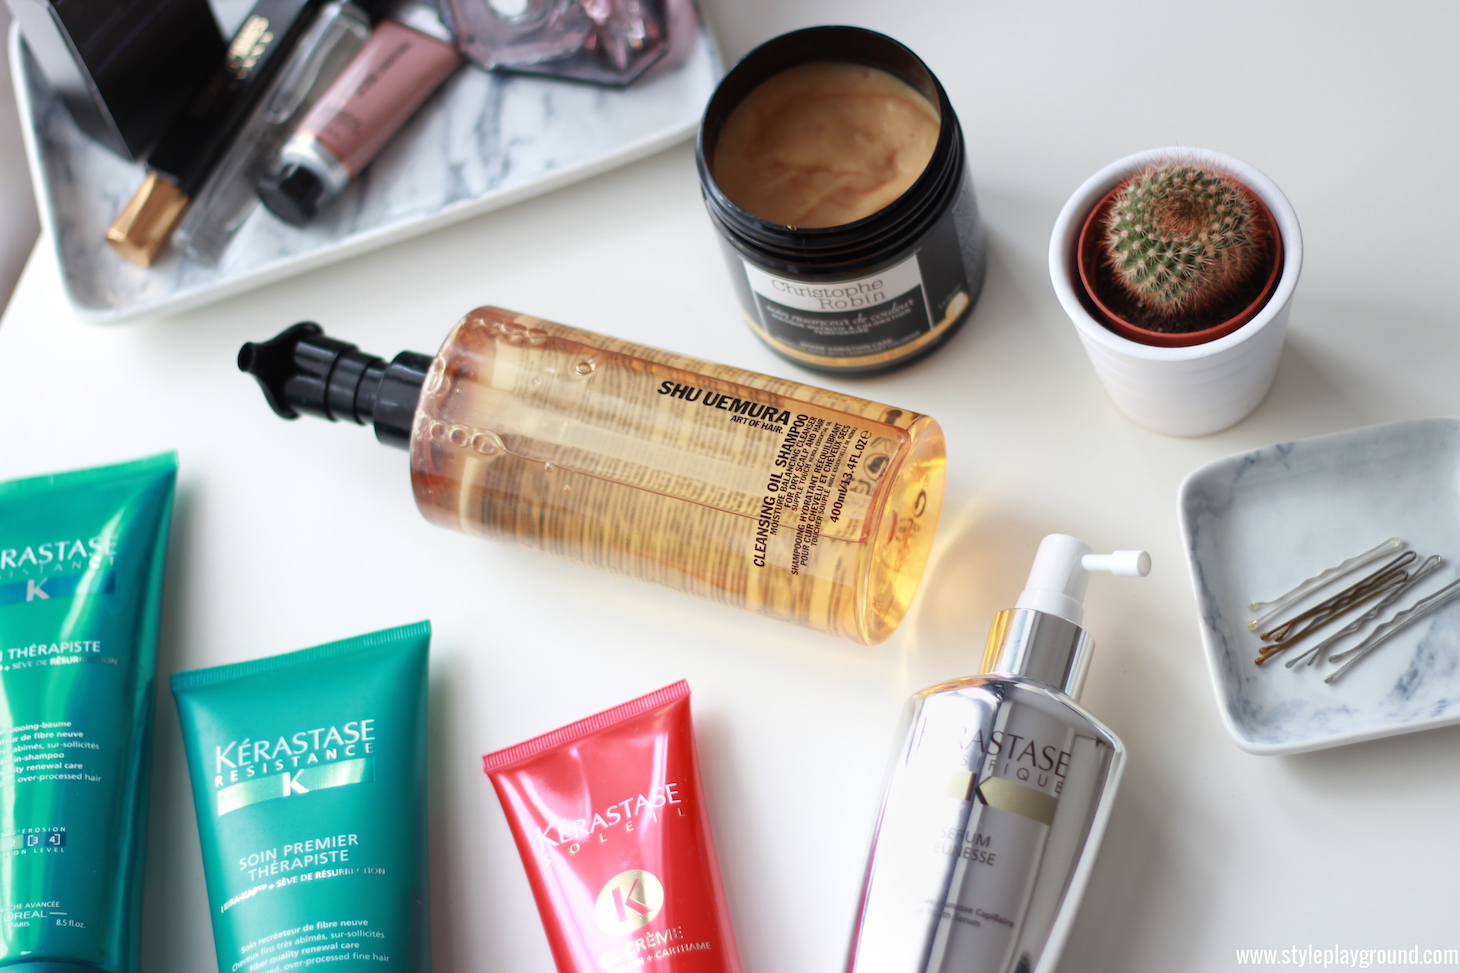 hair products I am loving right now